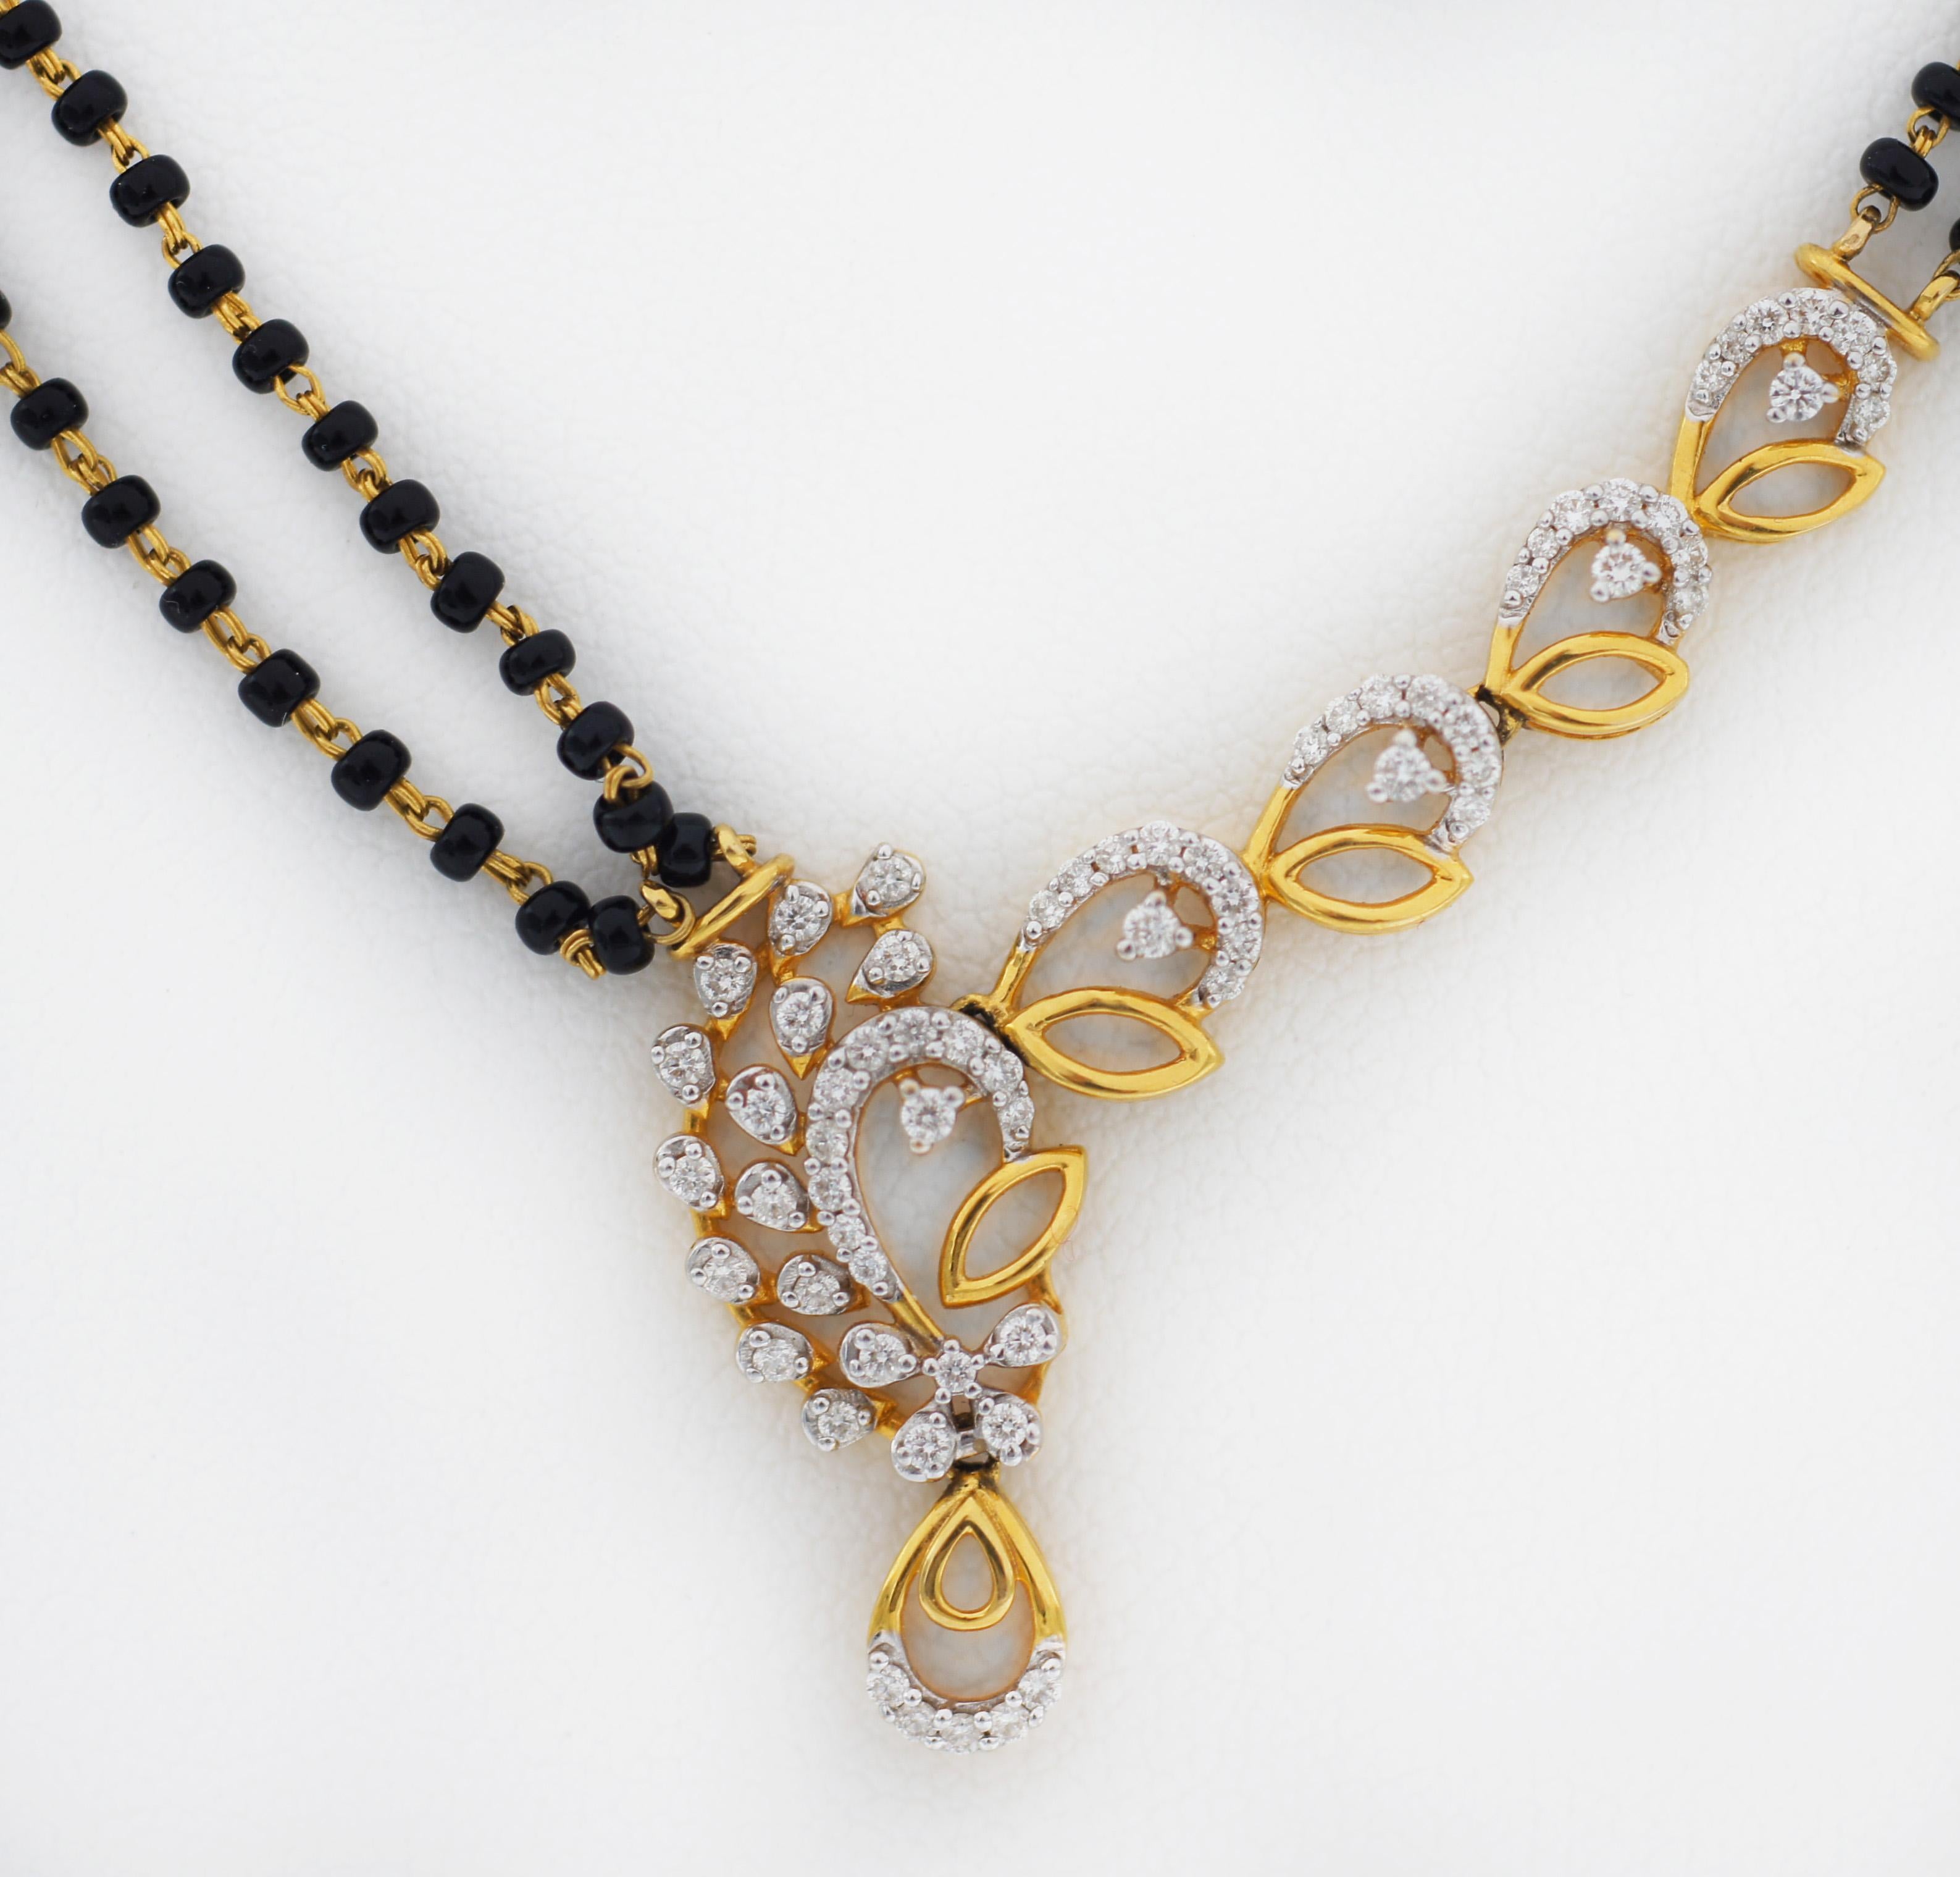 Graceful and timeless, this mangalsutra elegantly captures the essence of a sacred bond.
A symphony of black beads and diamond embedded in gold.
Made in Indian 22K Gold
With Diamond Pendant
and 2 strand Black beads chain
Necklace approx. up to 18